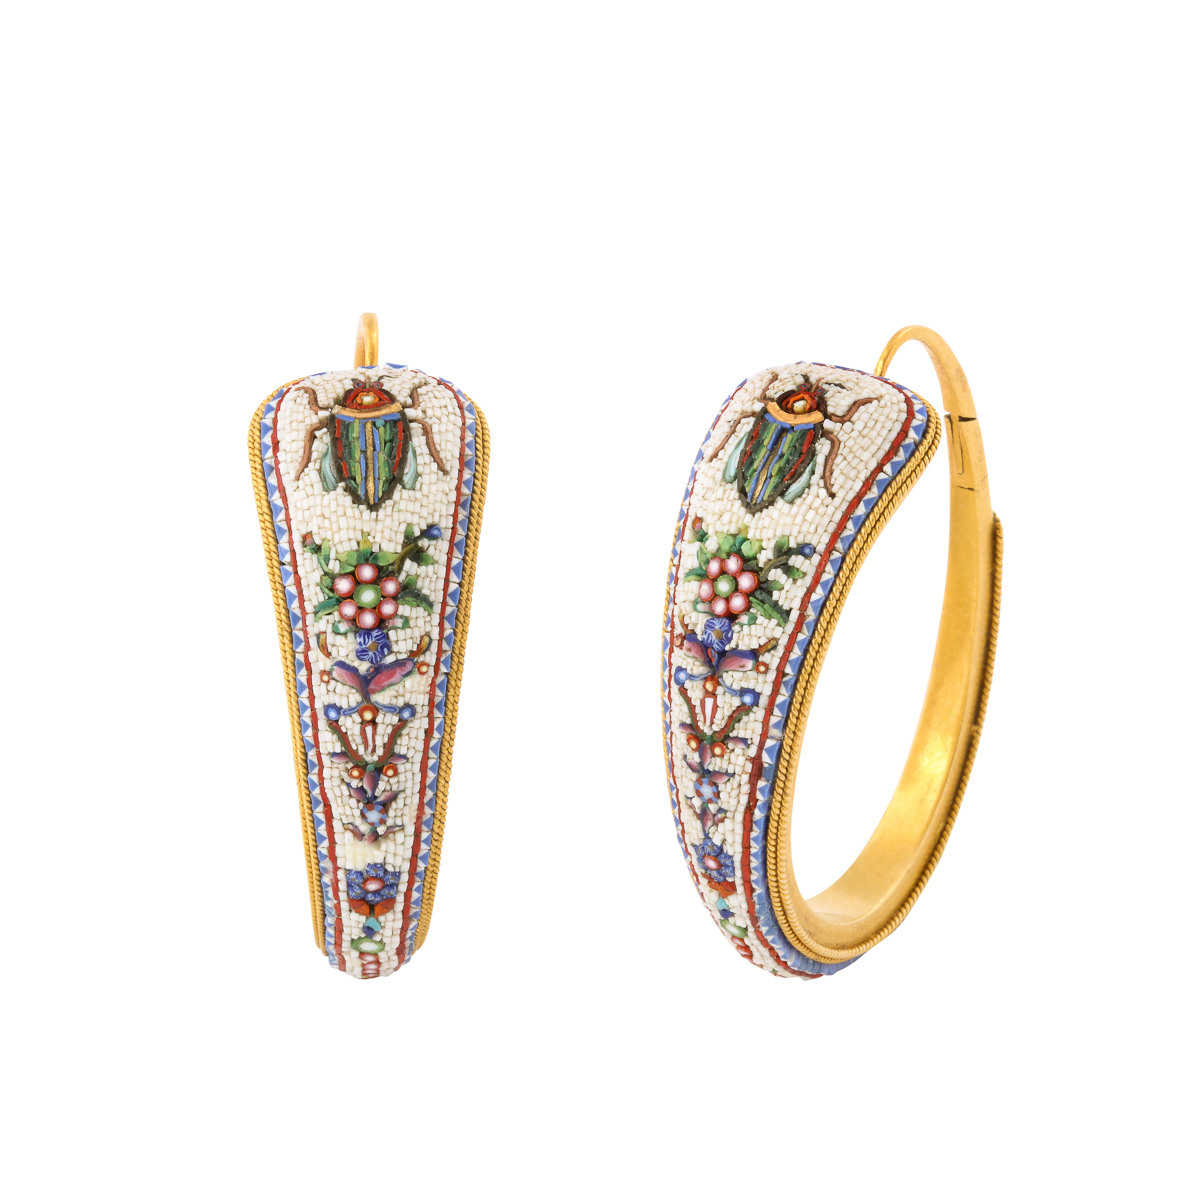 antique gold hoop earrings with micromosaic design of beetles and flowers